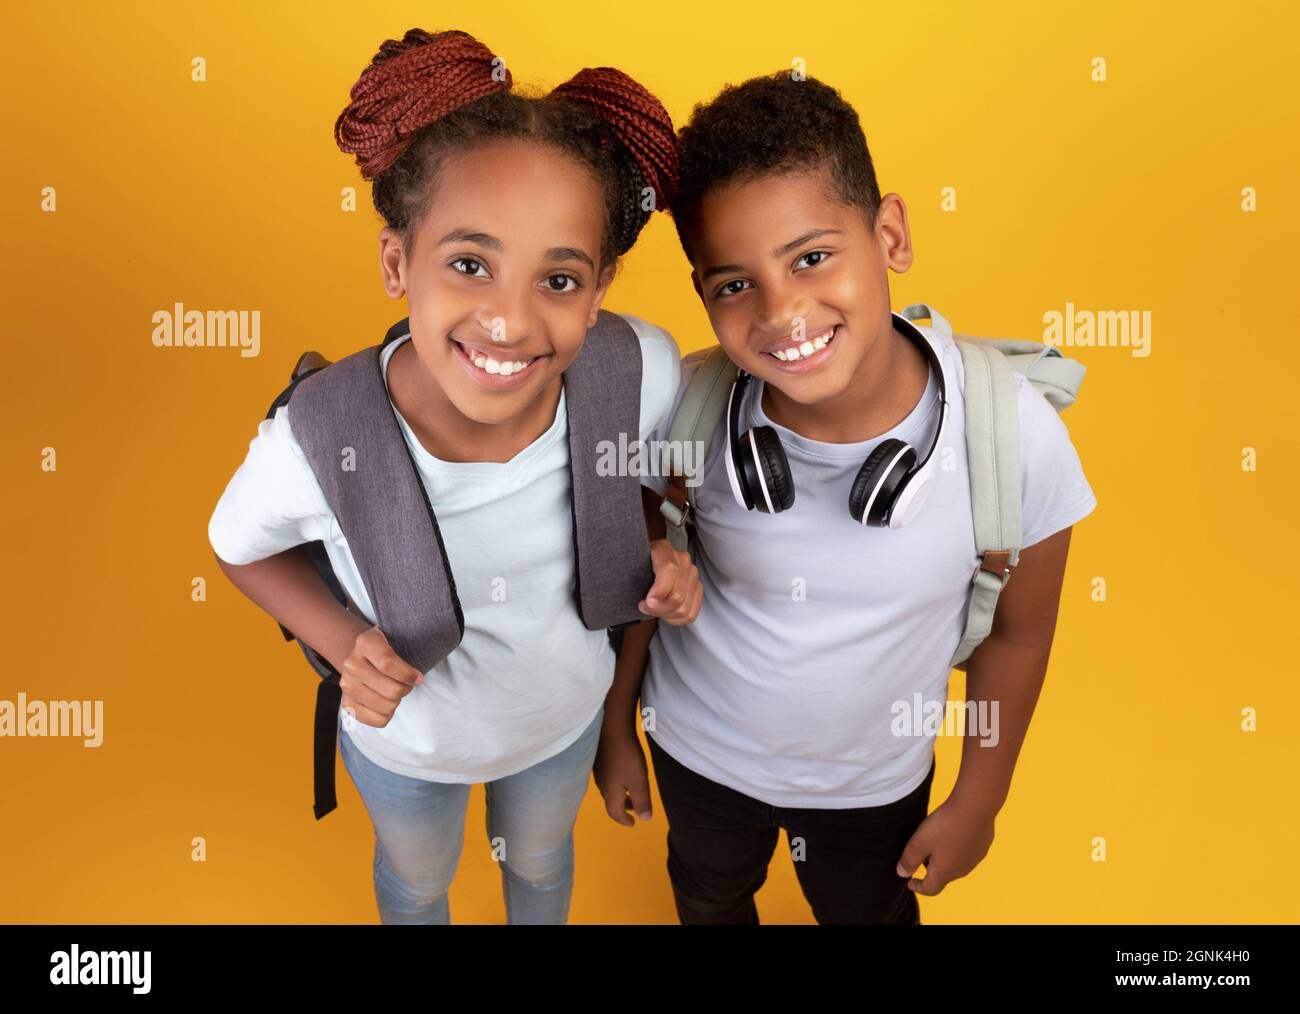 Top view of cheerful black pupils going to school Stock Photo